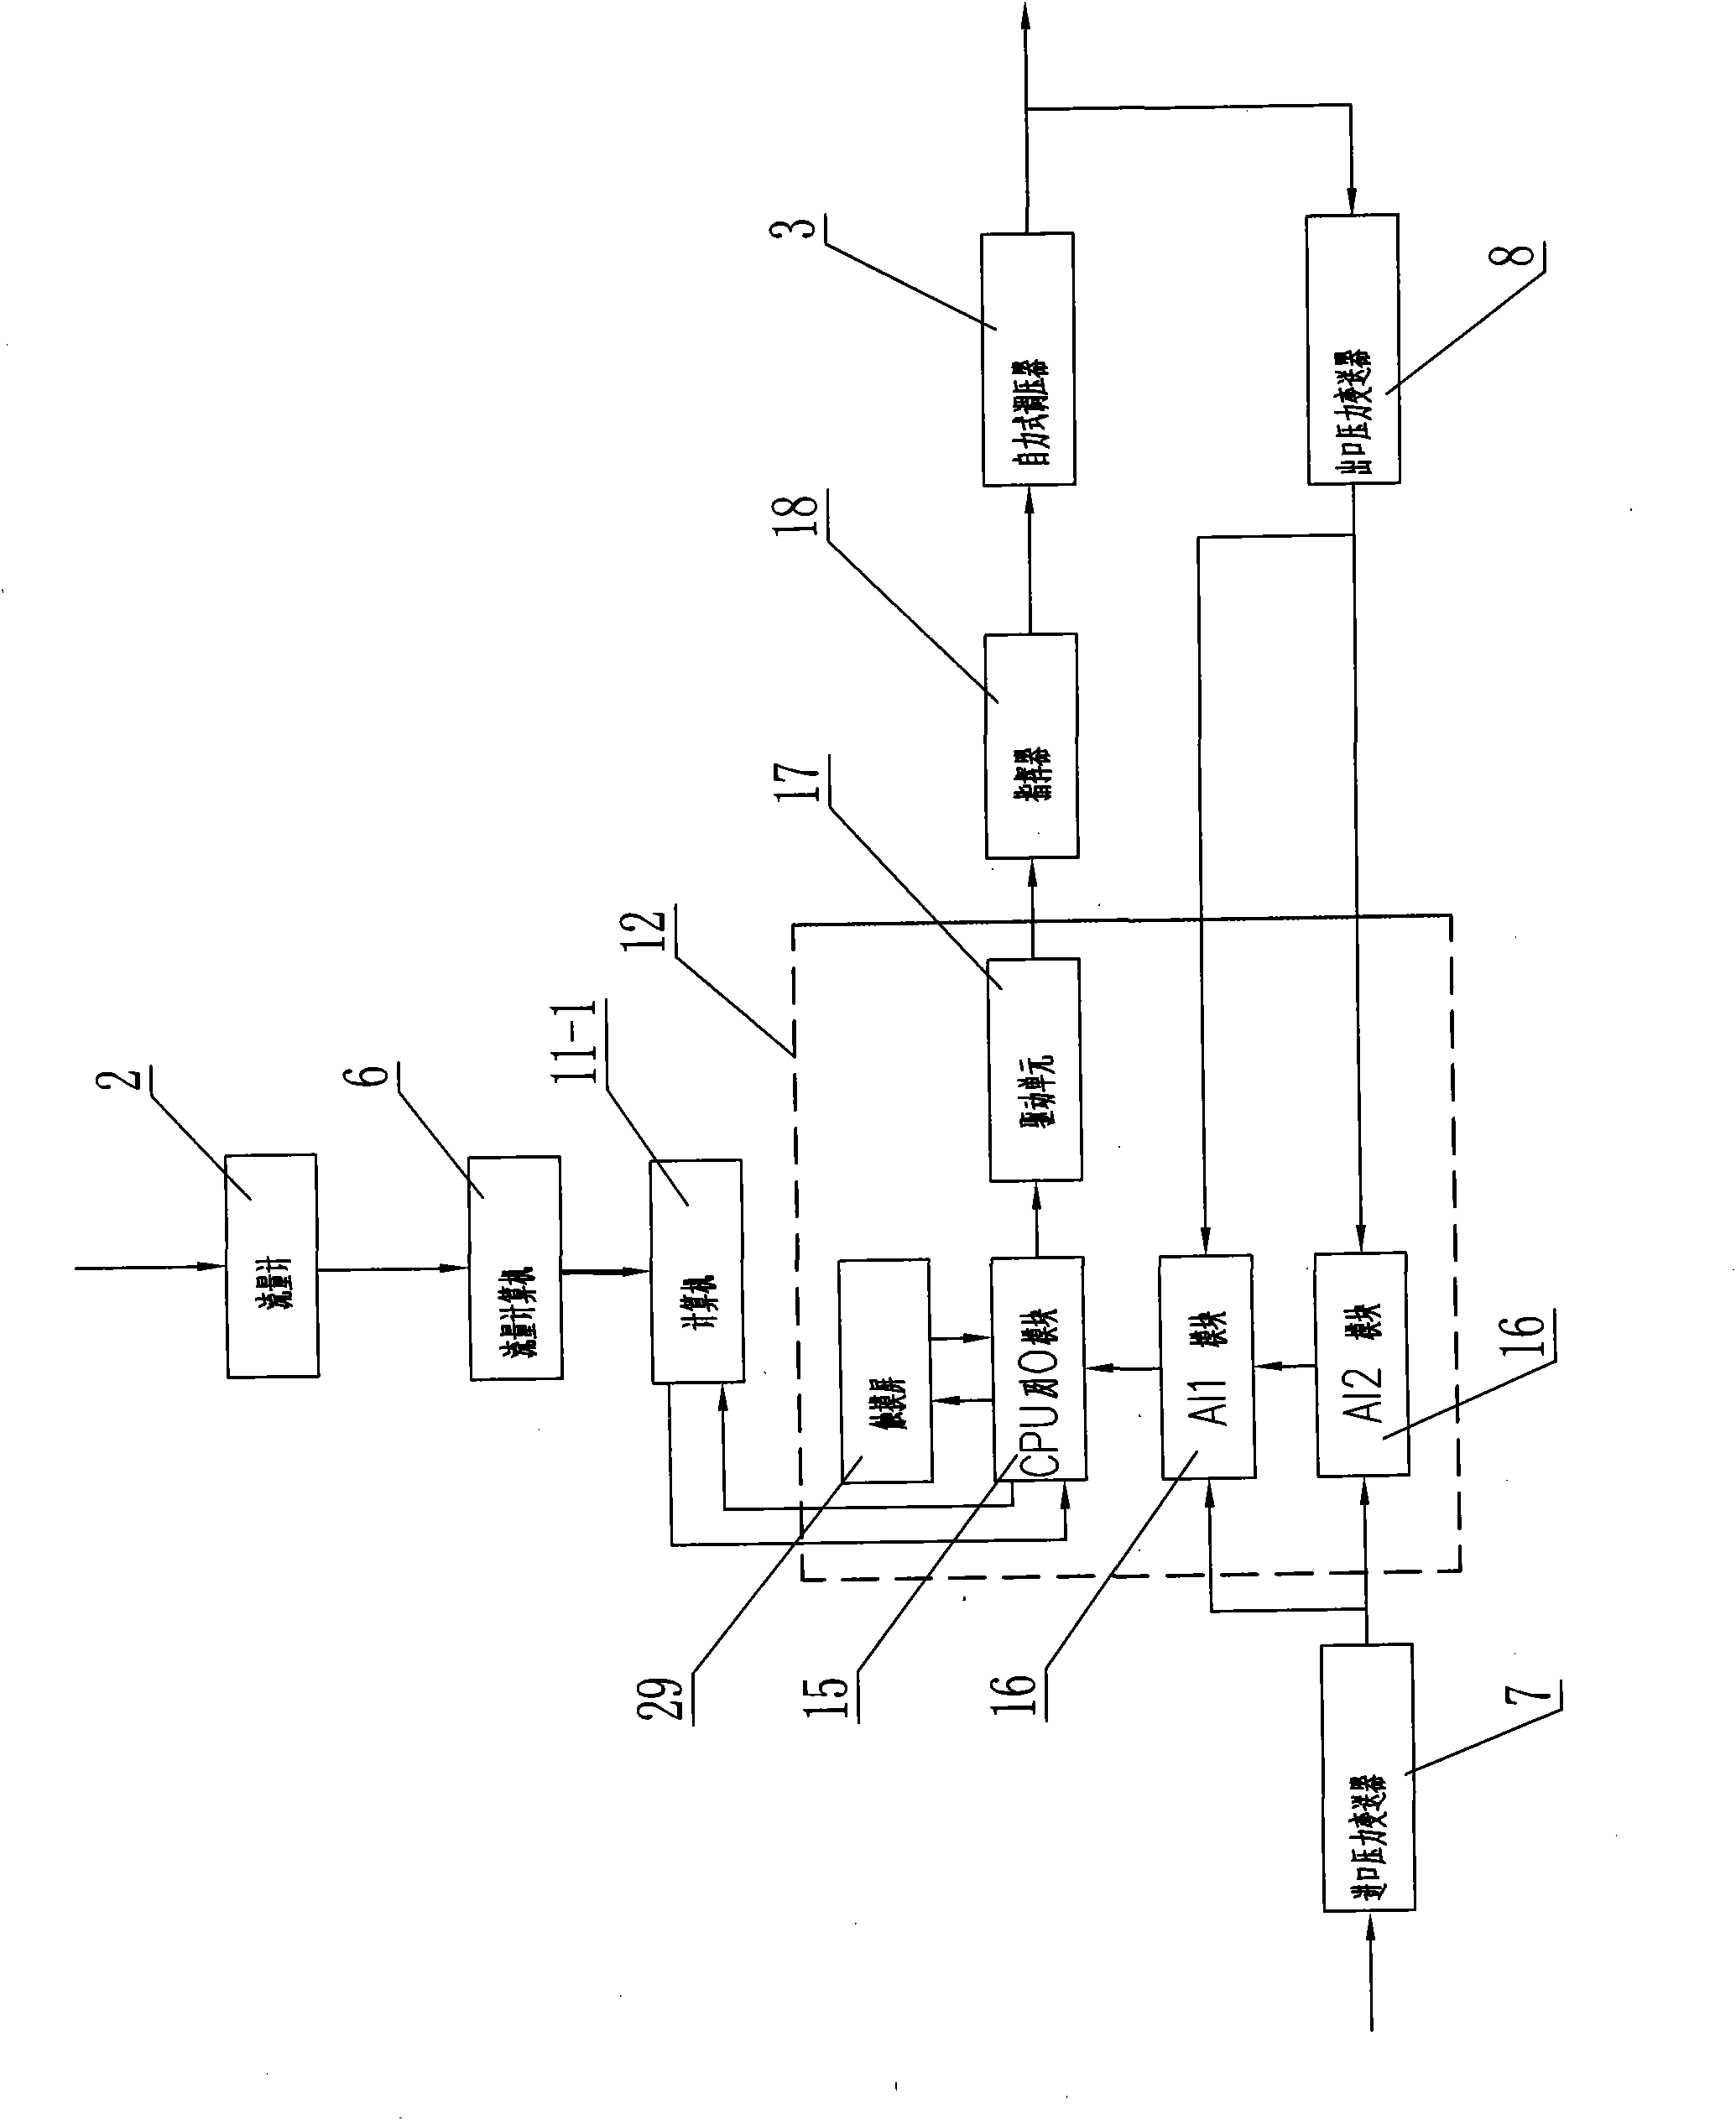 Remote pressure and flow control system of self-operated regulator